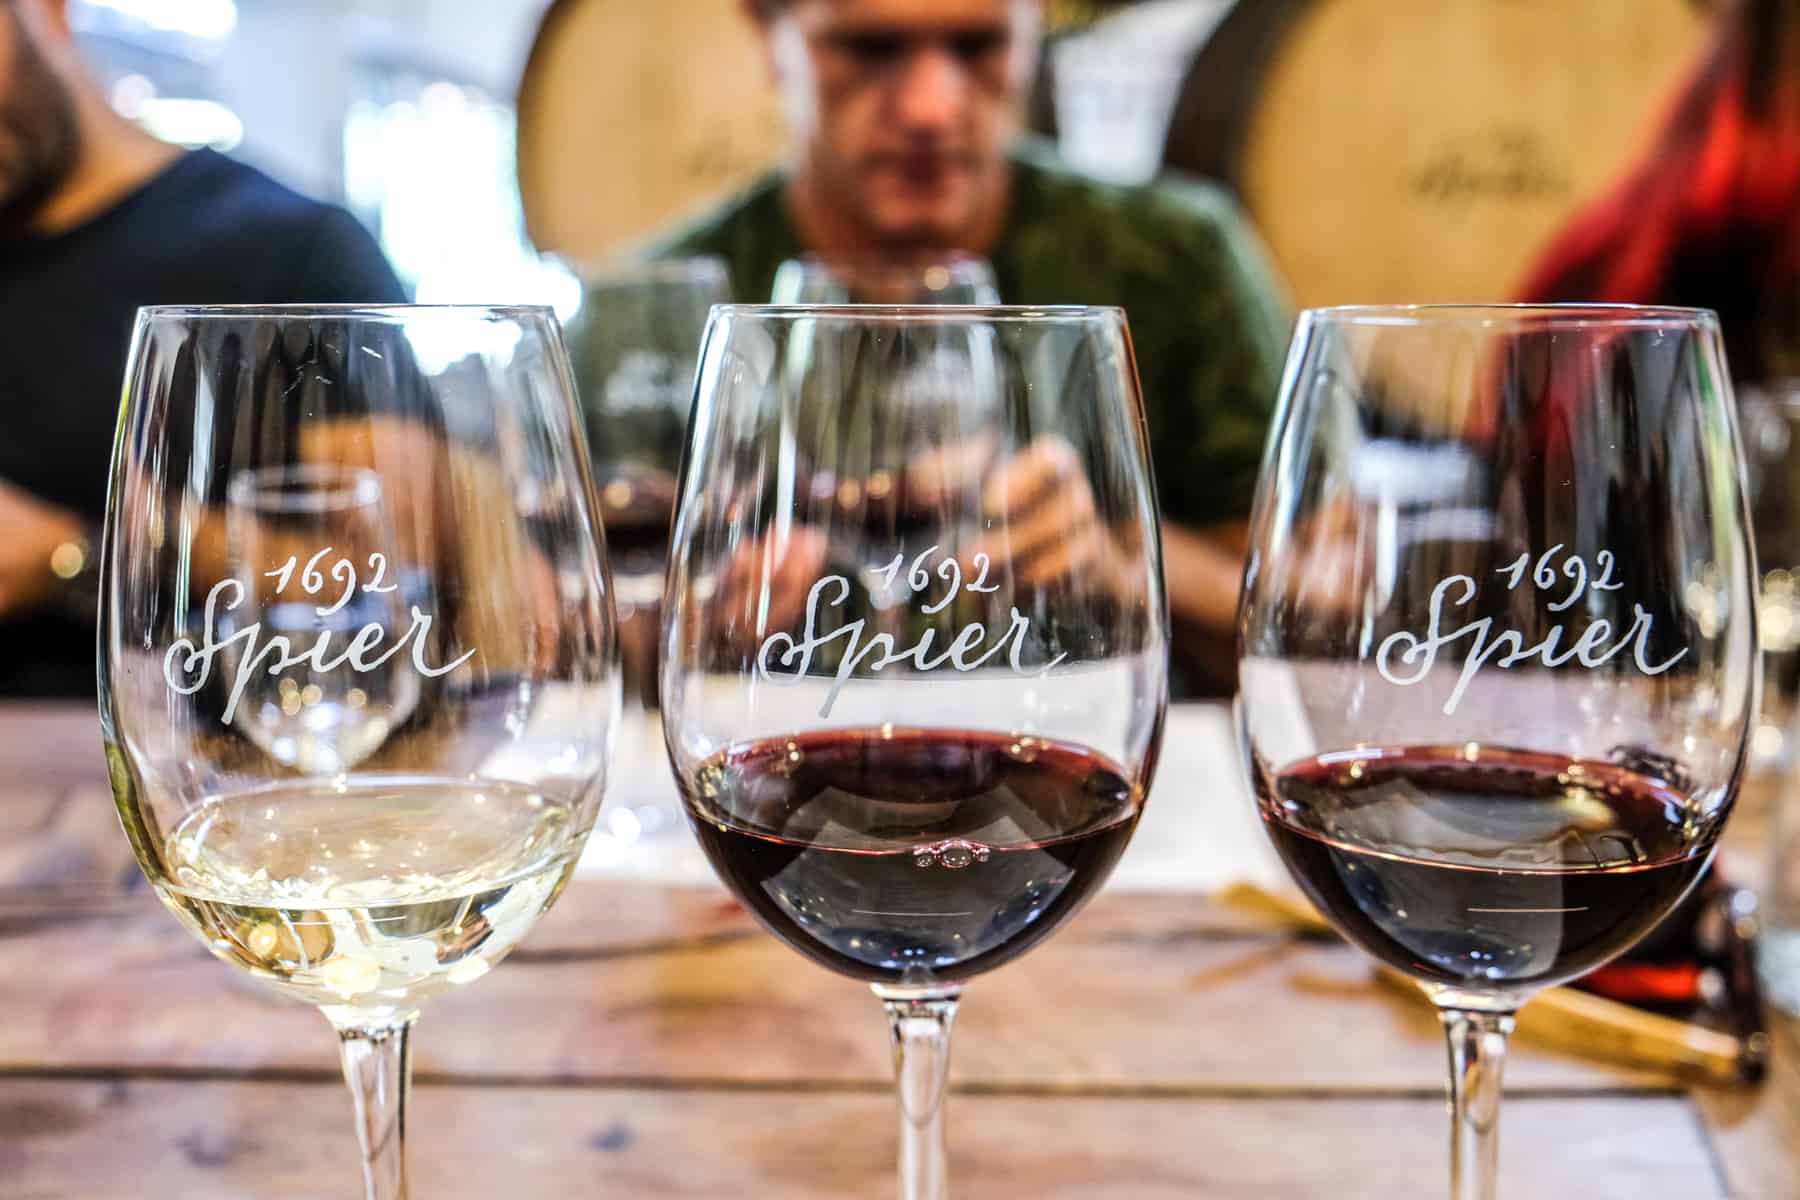 Three wine glasses, one containing white wine and two with red wine are lined up in a row as part of a wine tasting session. On the wine glasses is written 1692 Spier - the name of the vineyard in Stellenbosch, South Africa